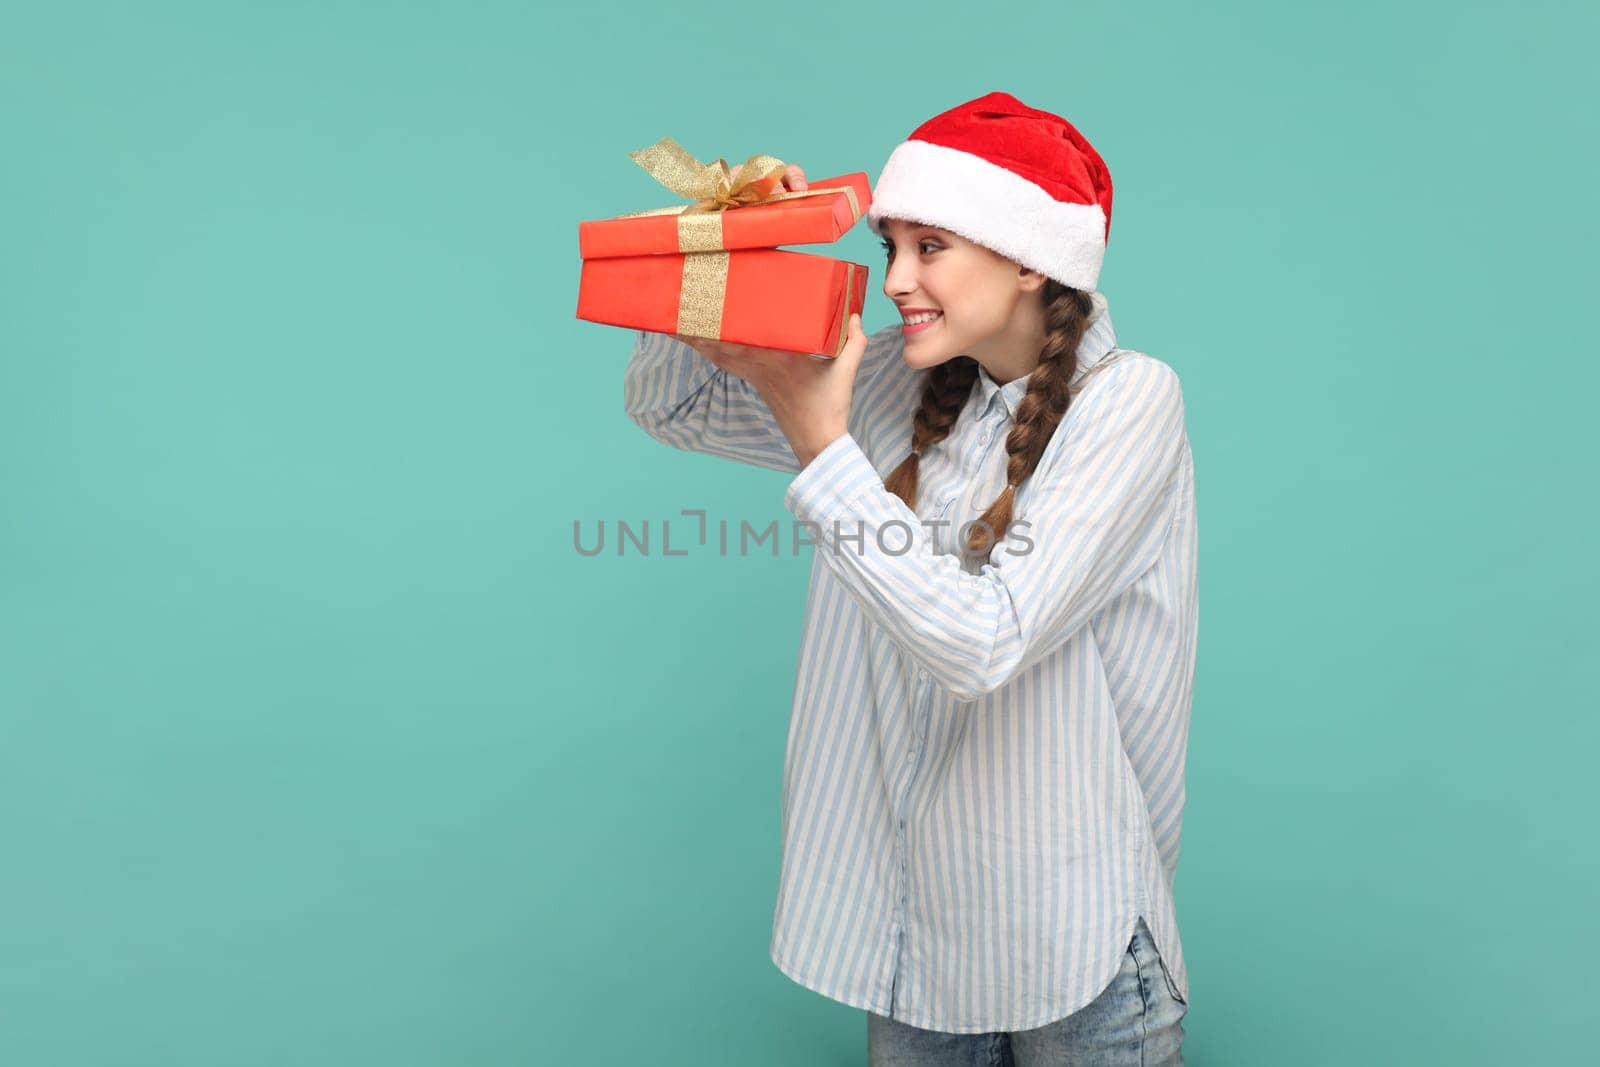 Portrait of happy optimistic girl with braids wearing striped shirt and Santa Claus hat, holding present box, looking inside with smile. Indoor studio shot isolated on green background.